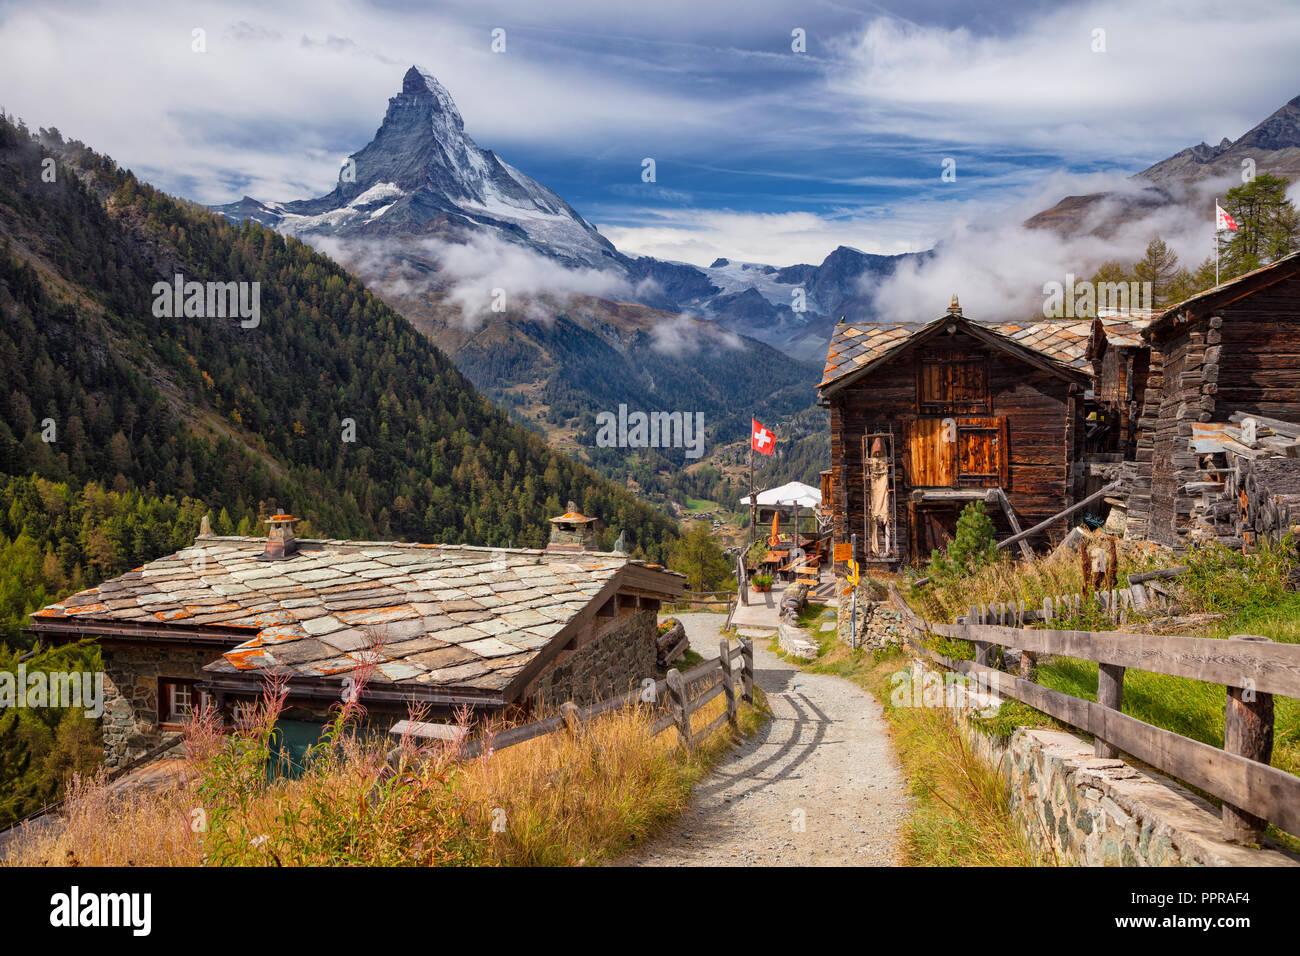 Swiss Alps. Landscape image of Swiss Alps with Matterhorn during autumn morning. Stock Photo